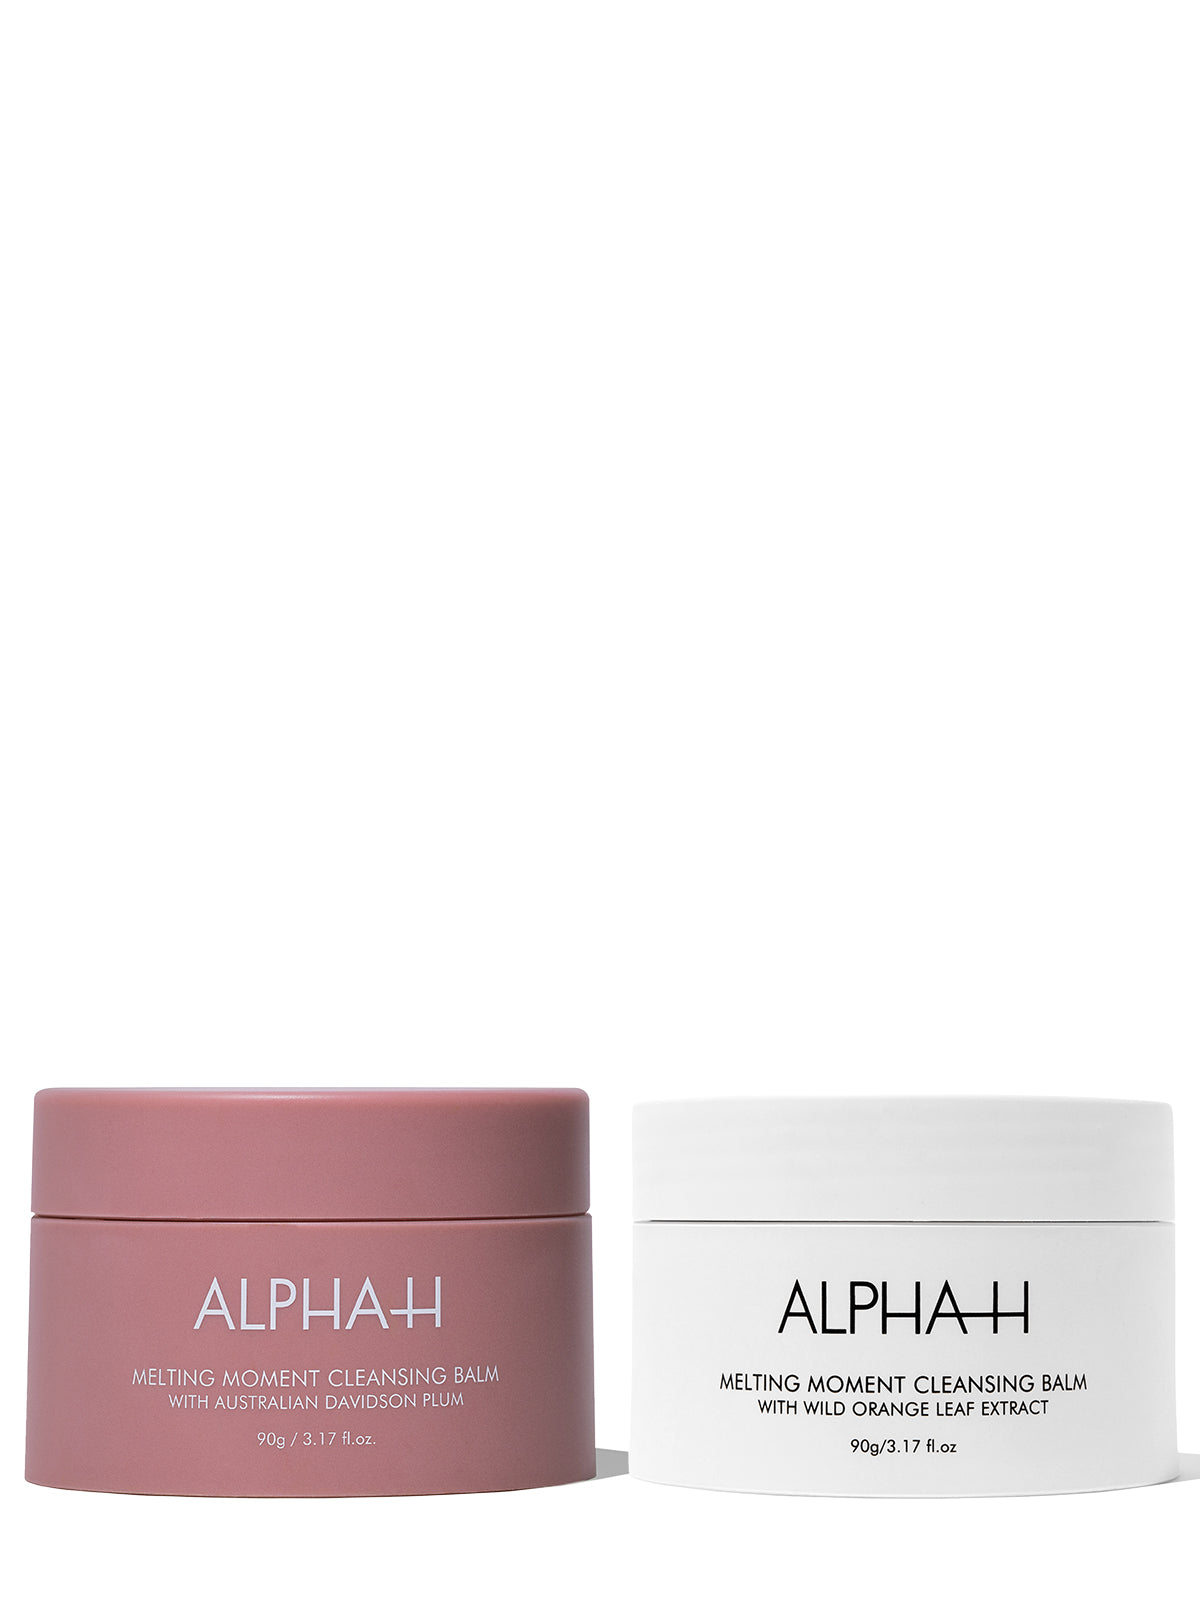 Limited Edition Cleansing Balm Duo